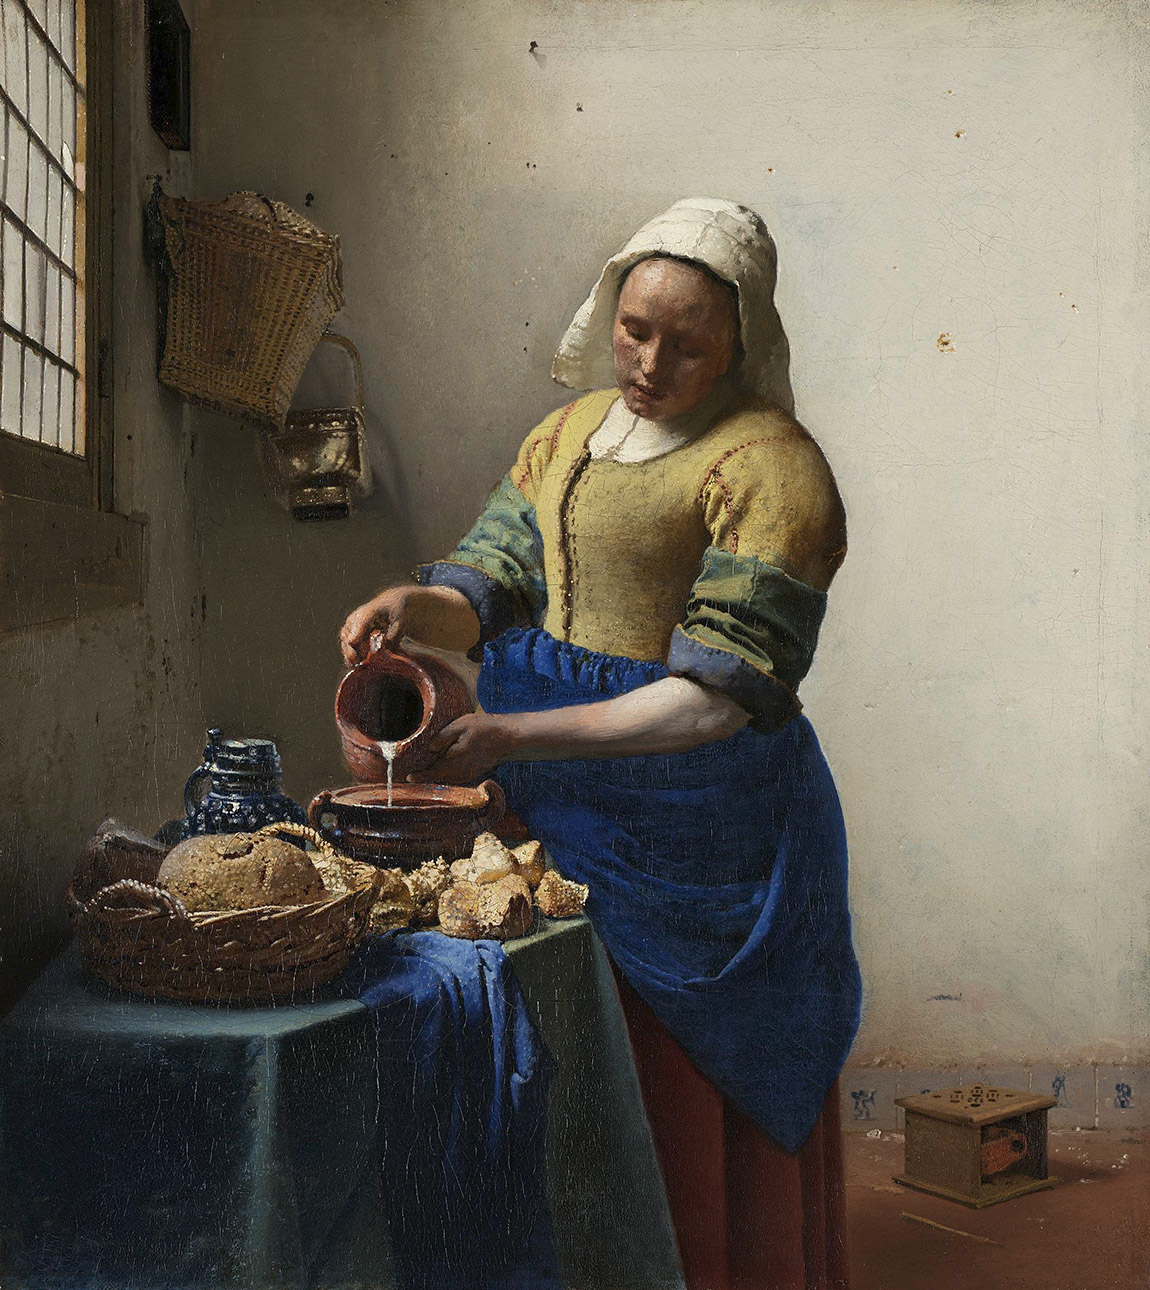 The greatest ever Vermeer exhibition